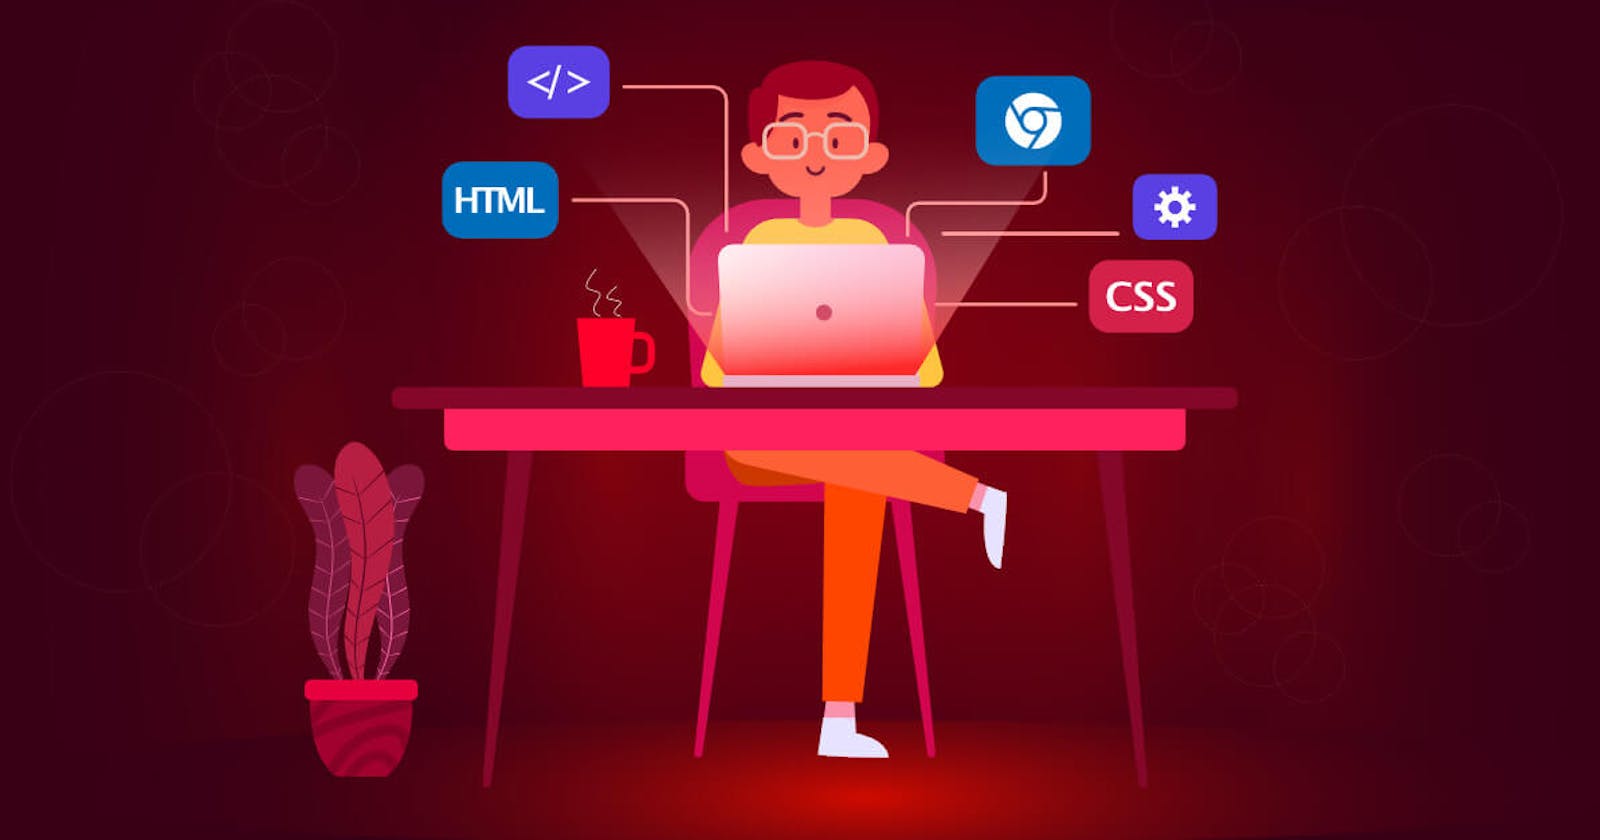 Top Useful Websites and Tools for Web Developers